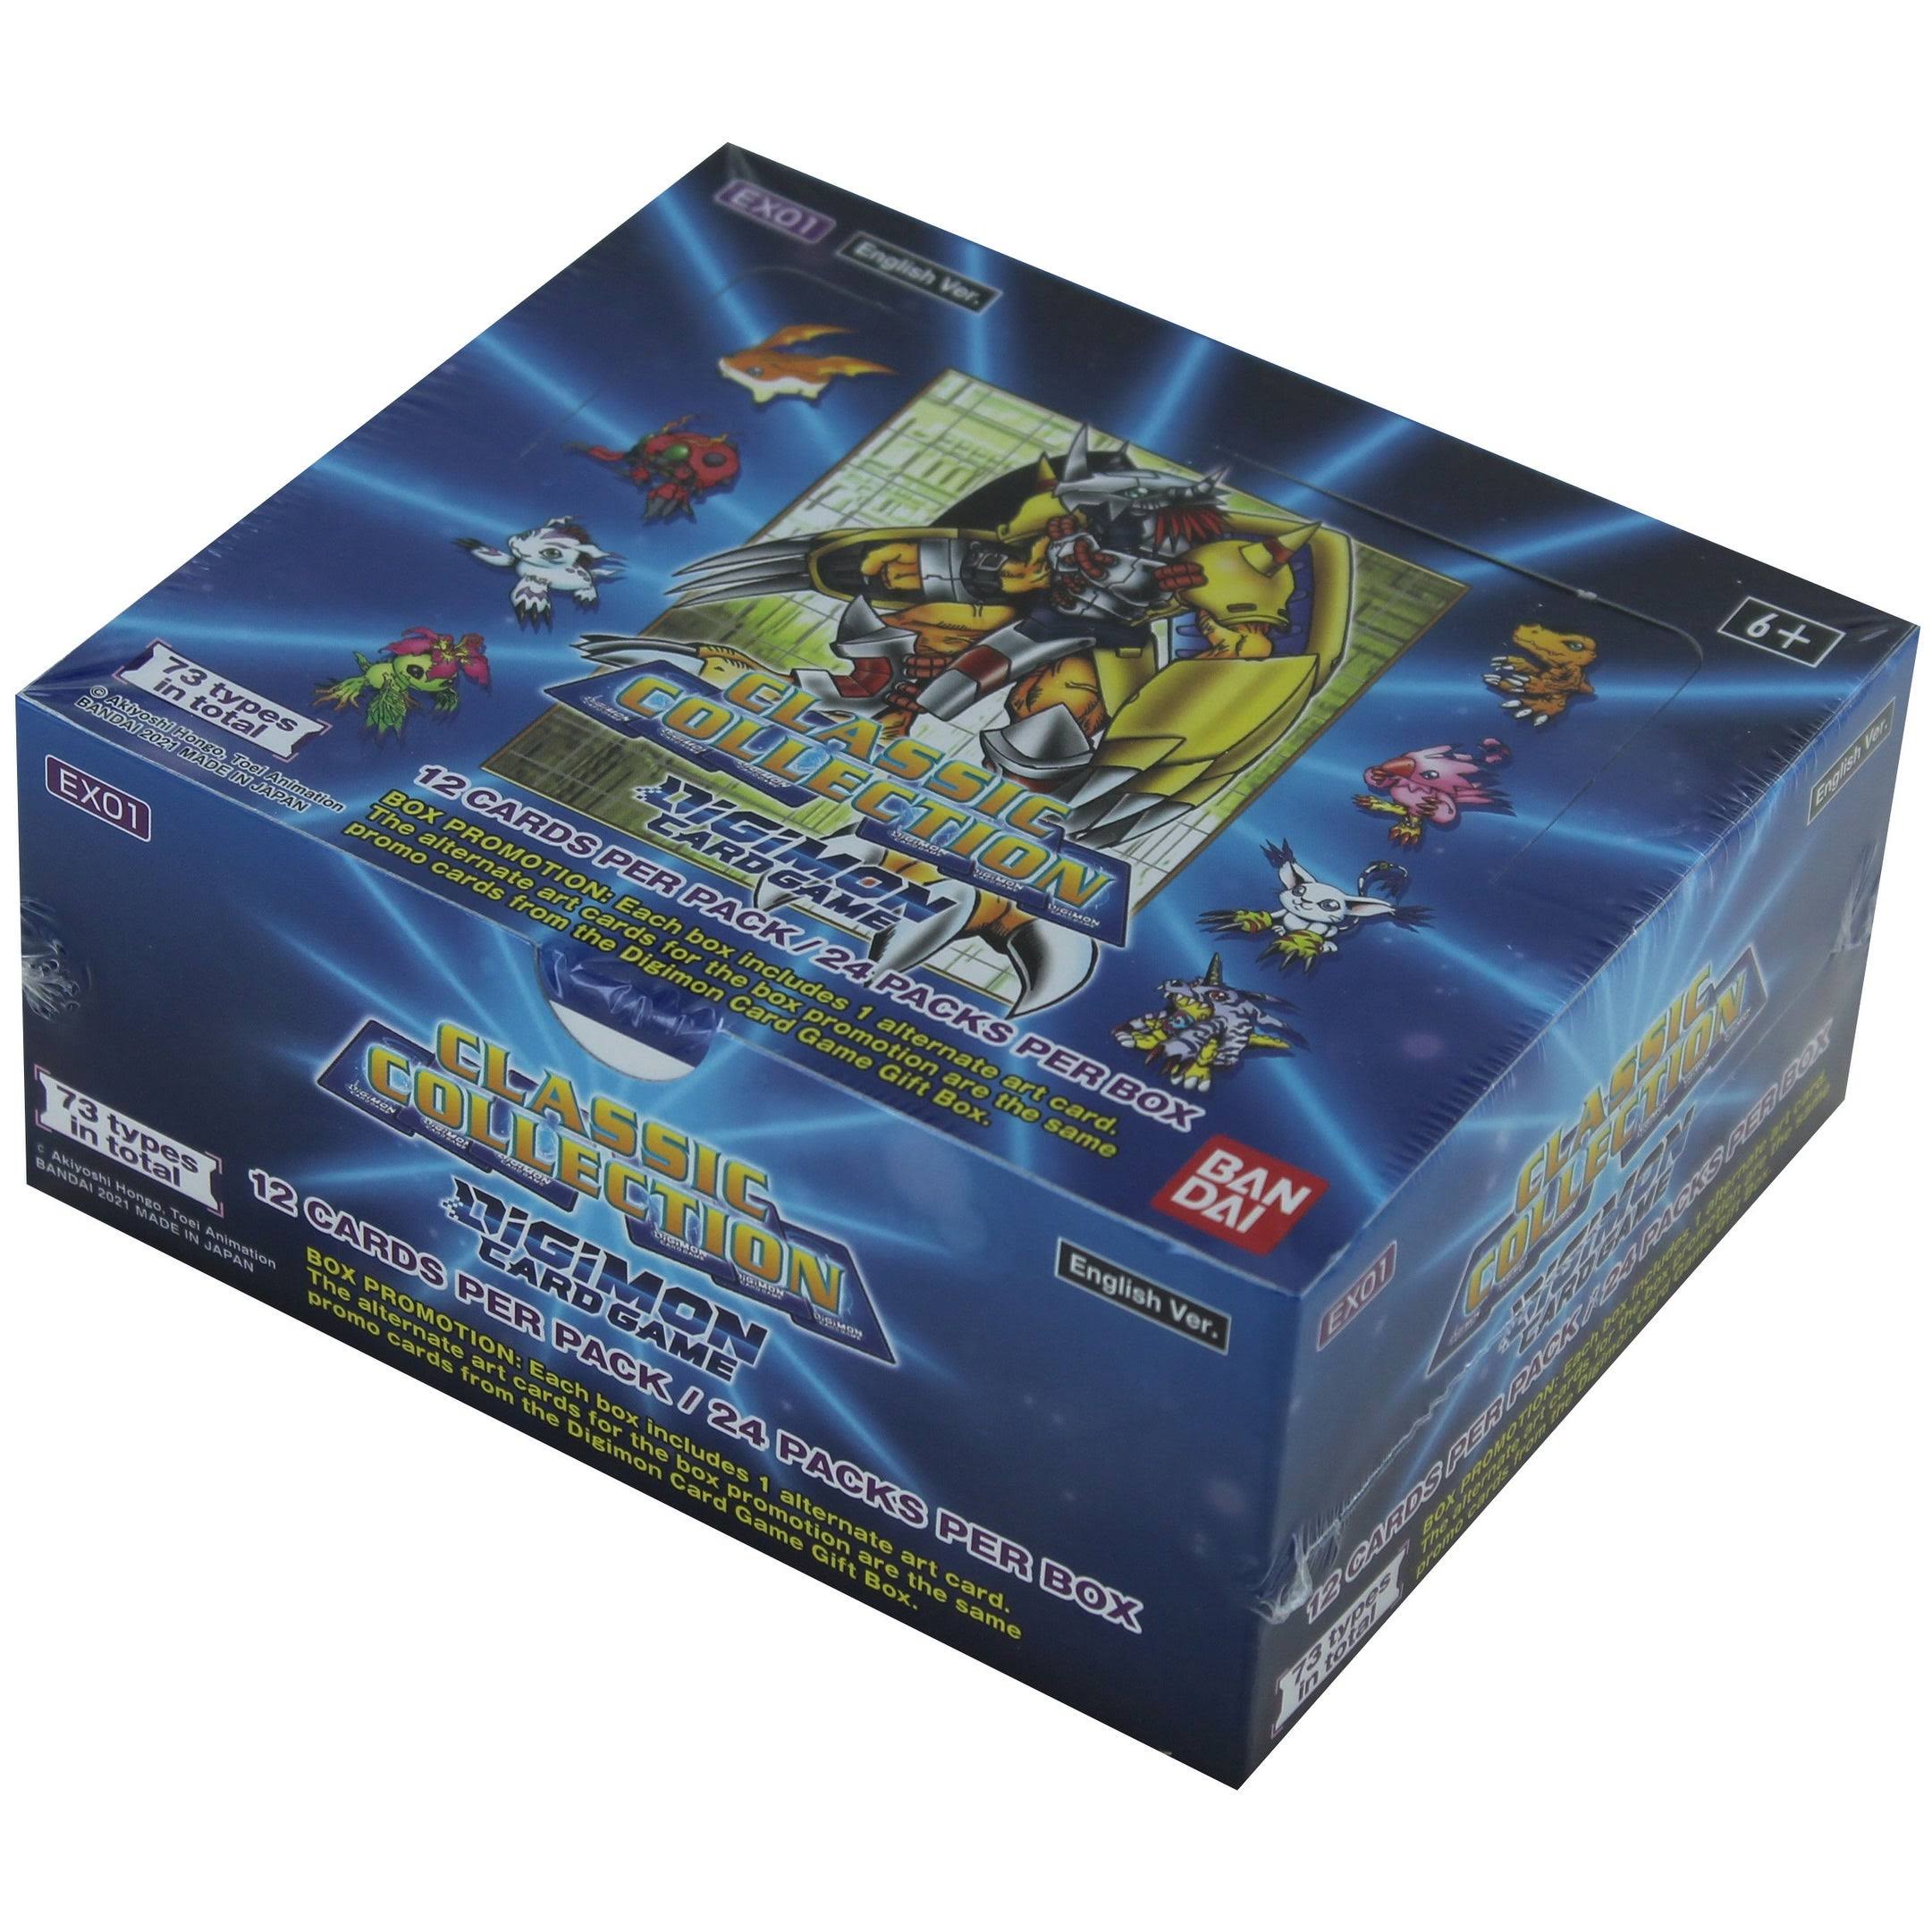 Digimon Card Game Classic Collection (EX01) Booster - Box